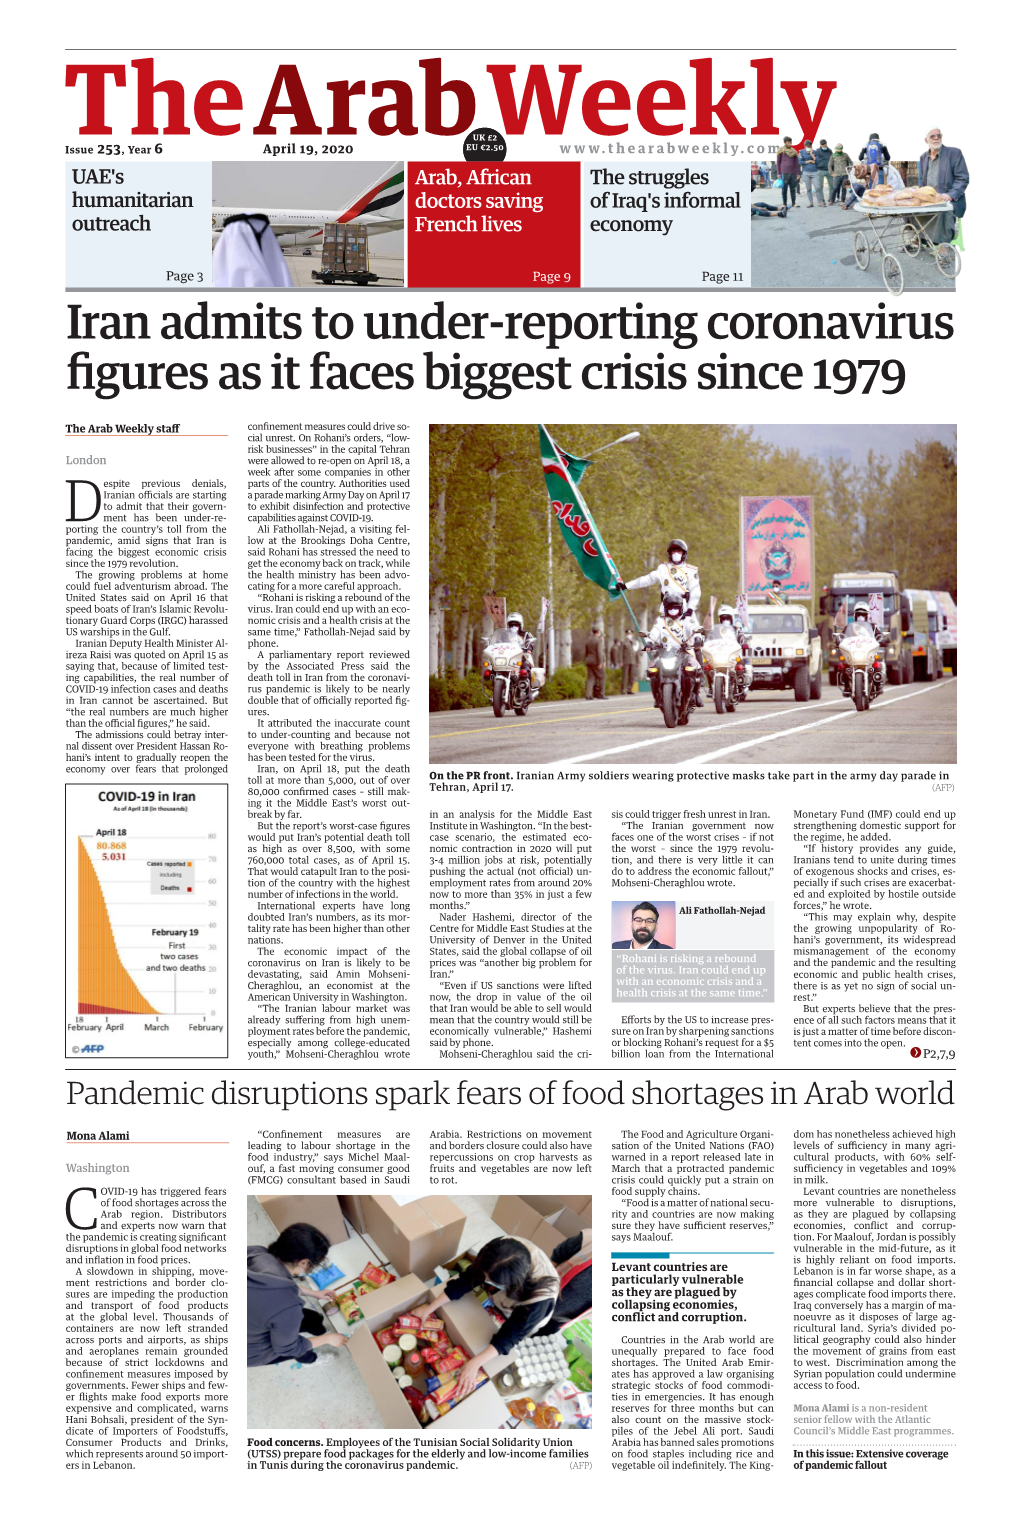 Iran Admits to Under-Reporting Coronavirus Figures As It Faces Biggest Crisis Since 1979